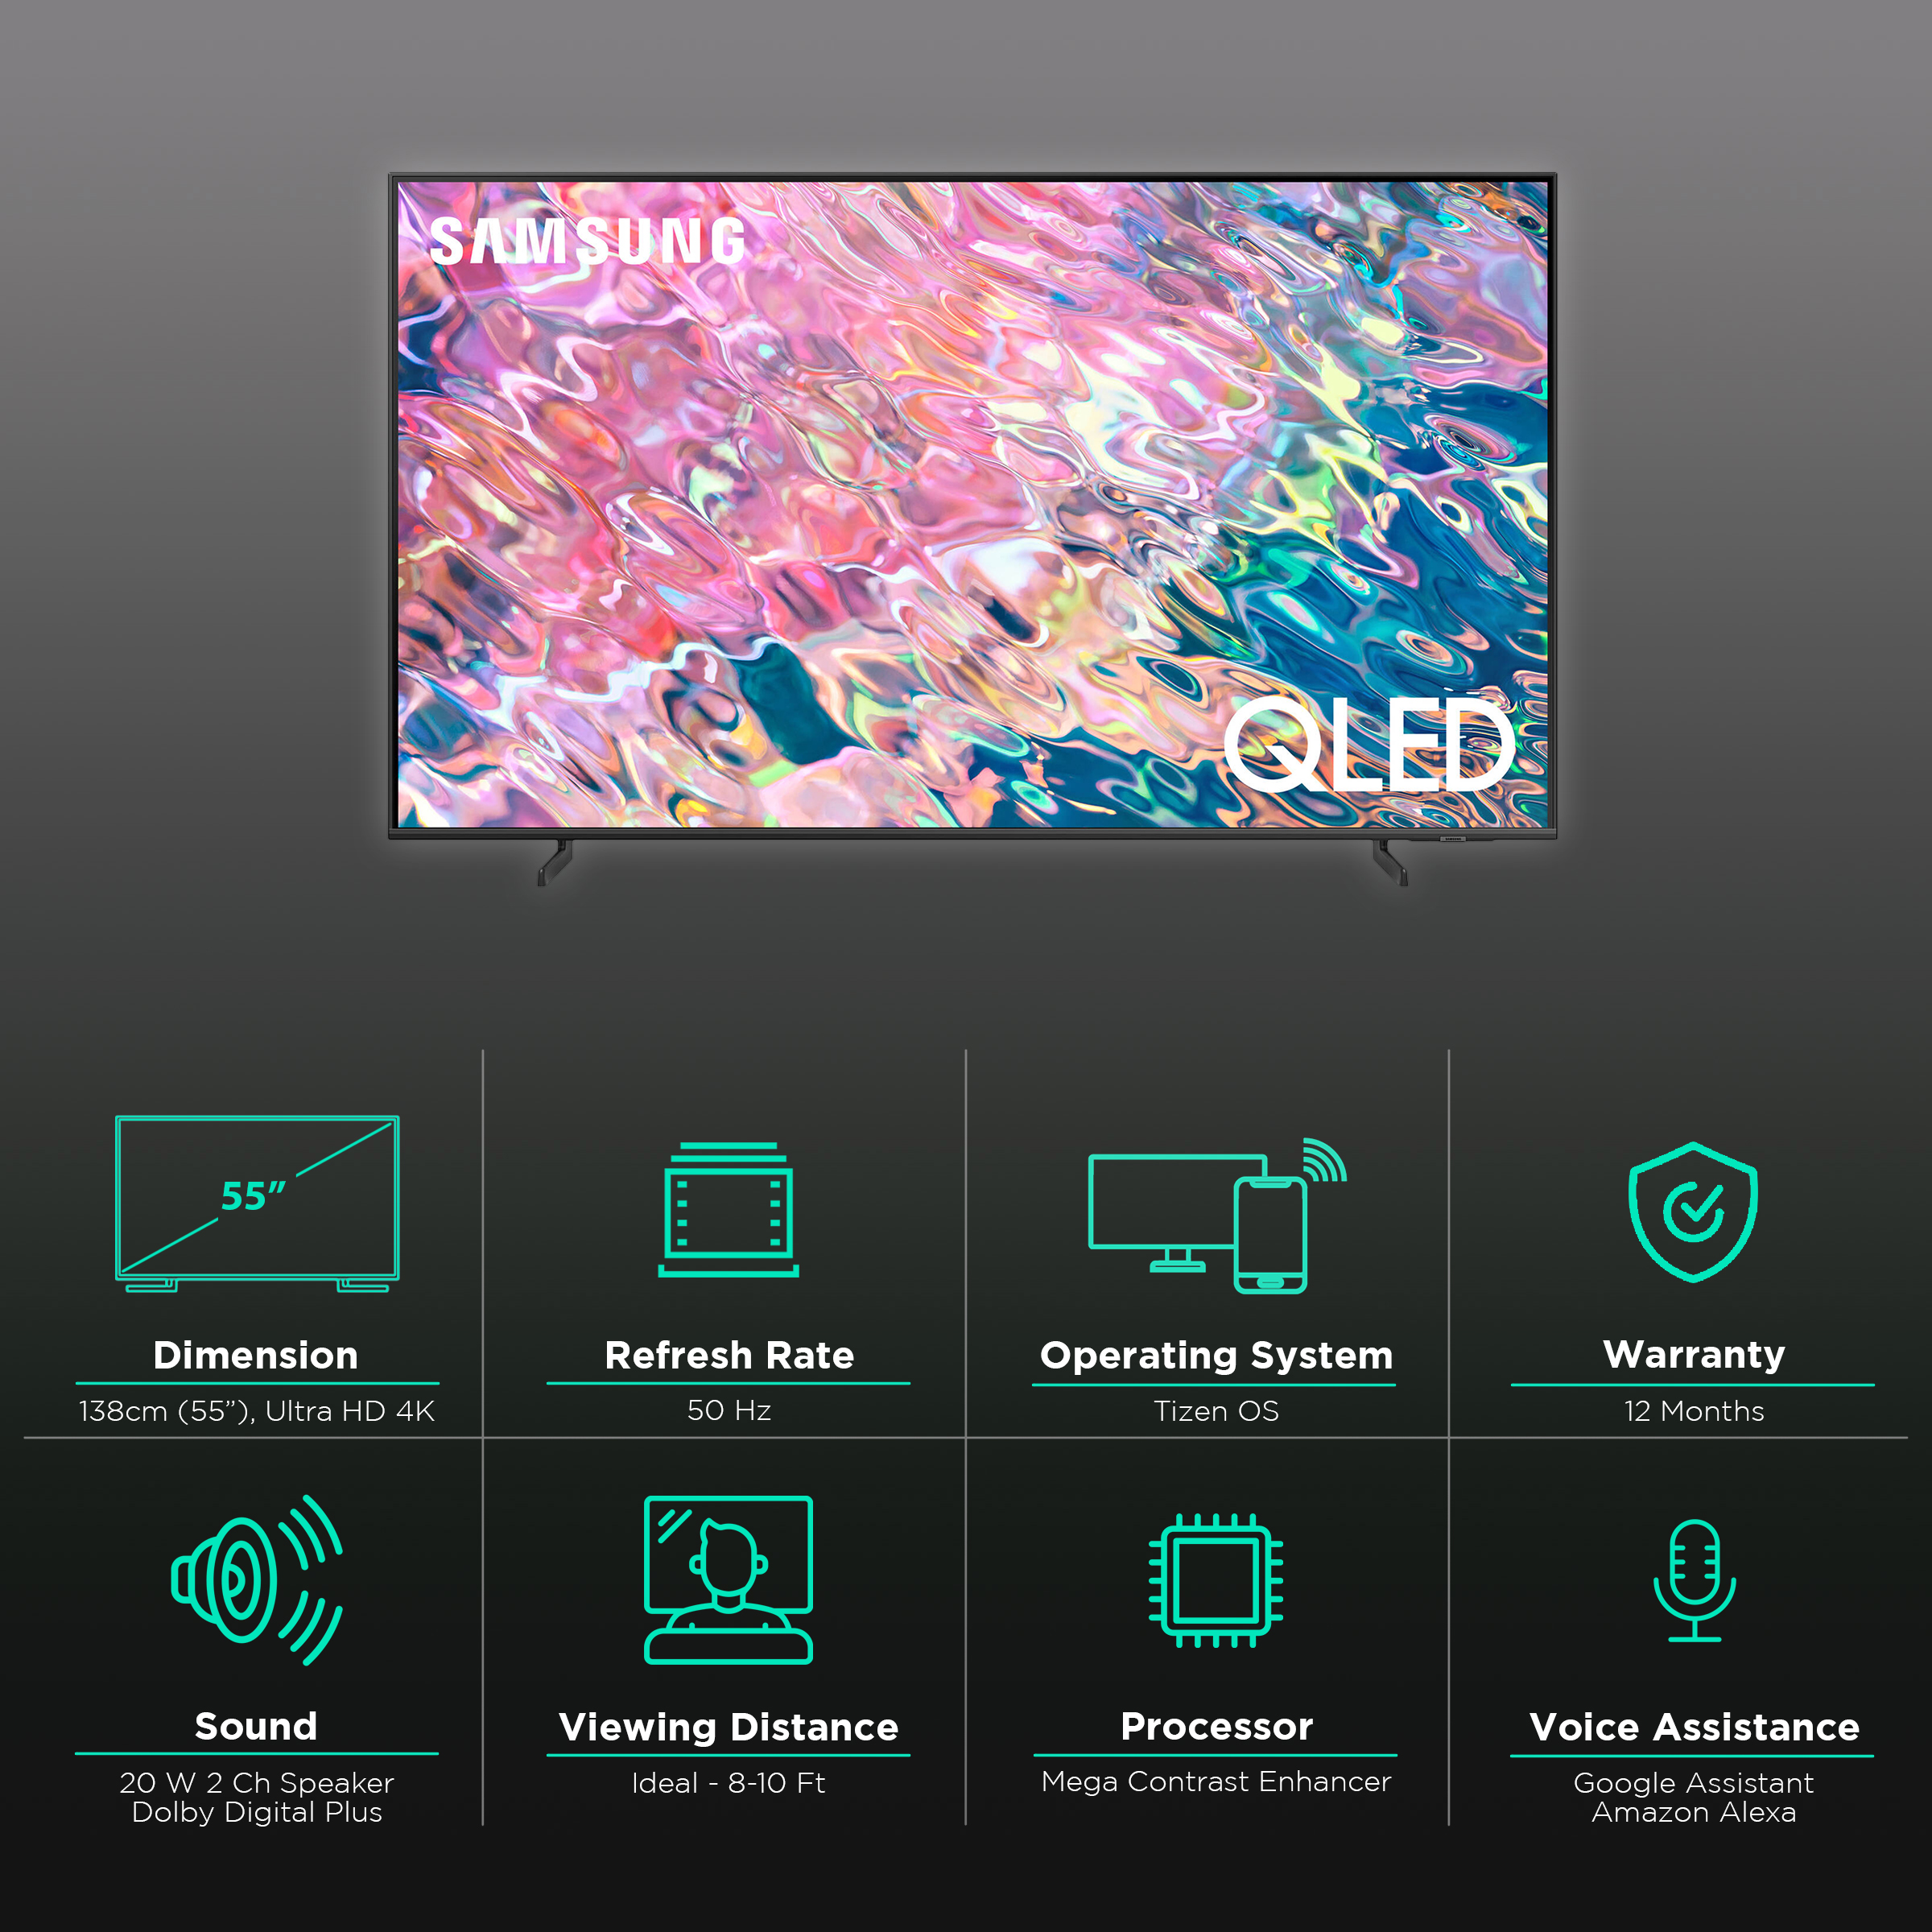 SAMSUNG Series 6 138 cm (55 inch) QLED 4K Ultra HD Tizen TV with Alexa Compatibility_3